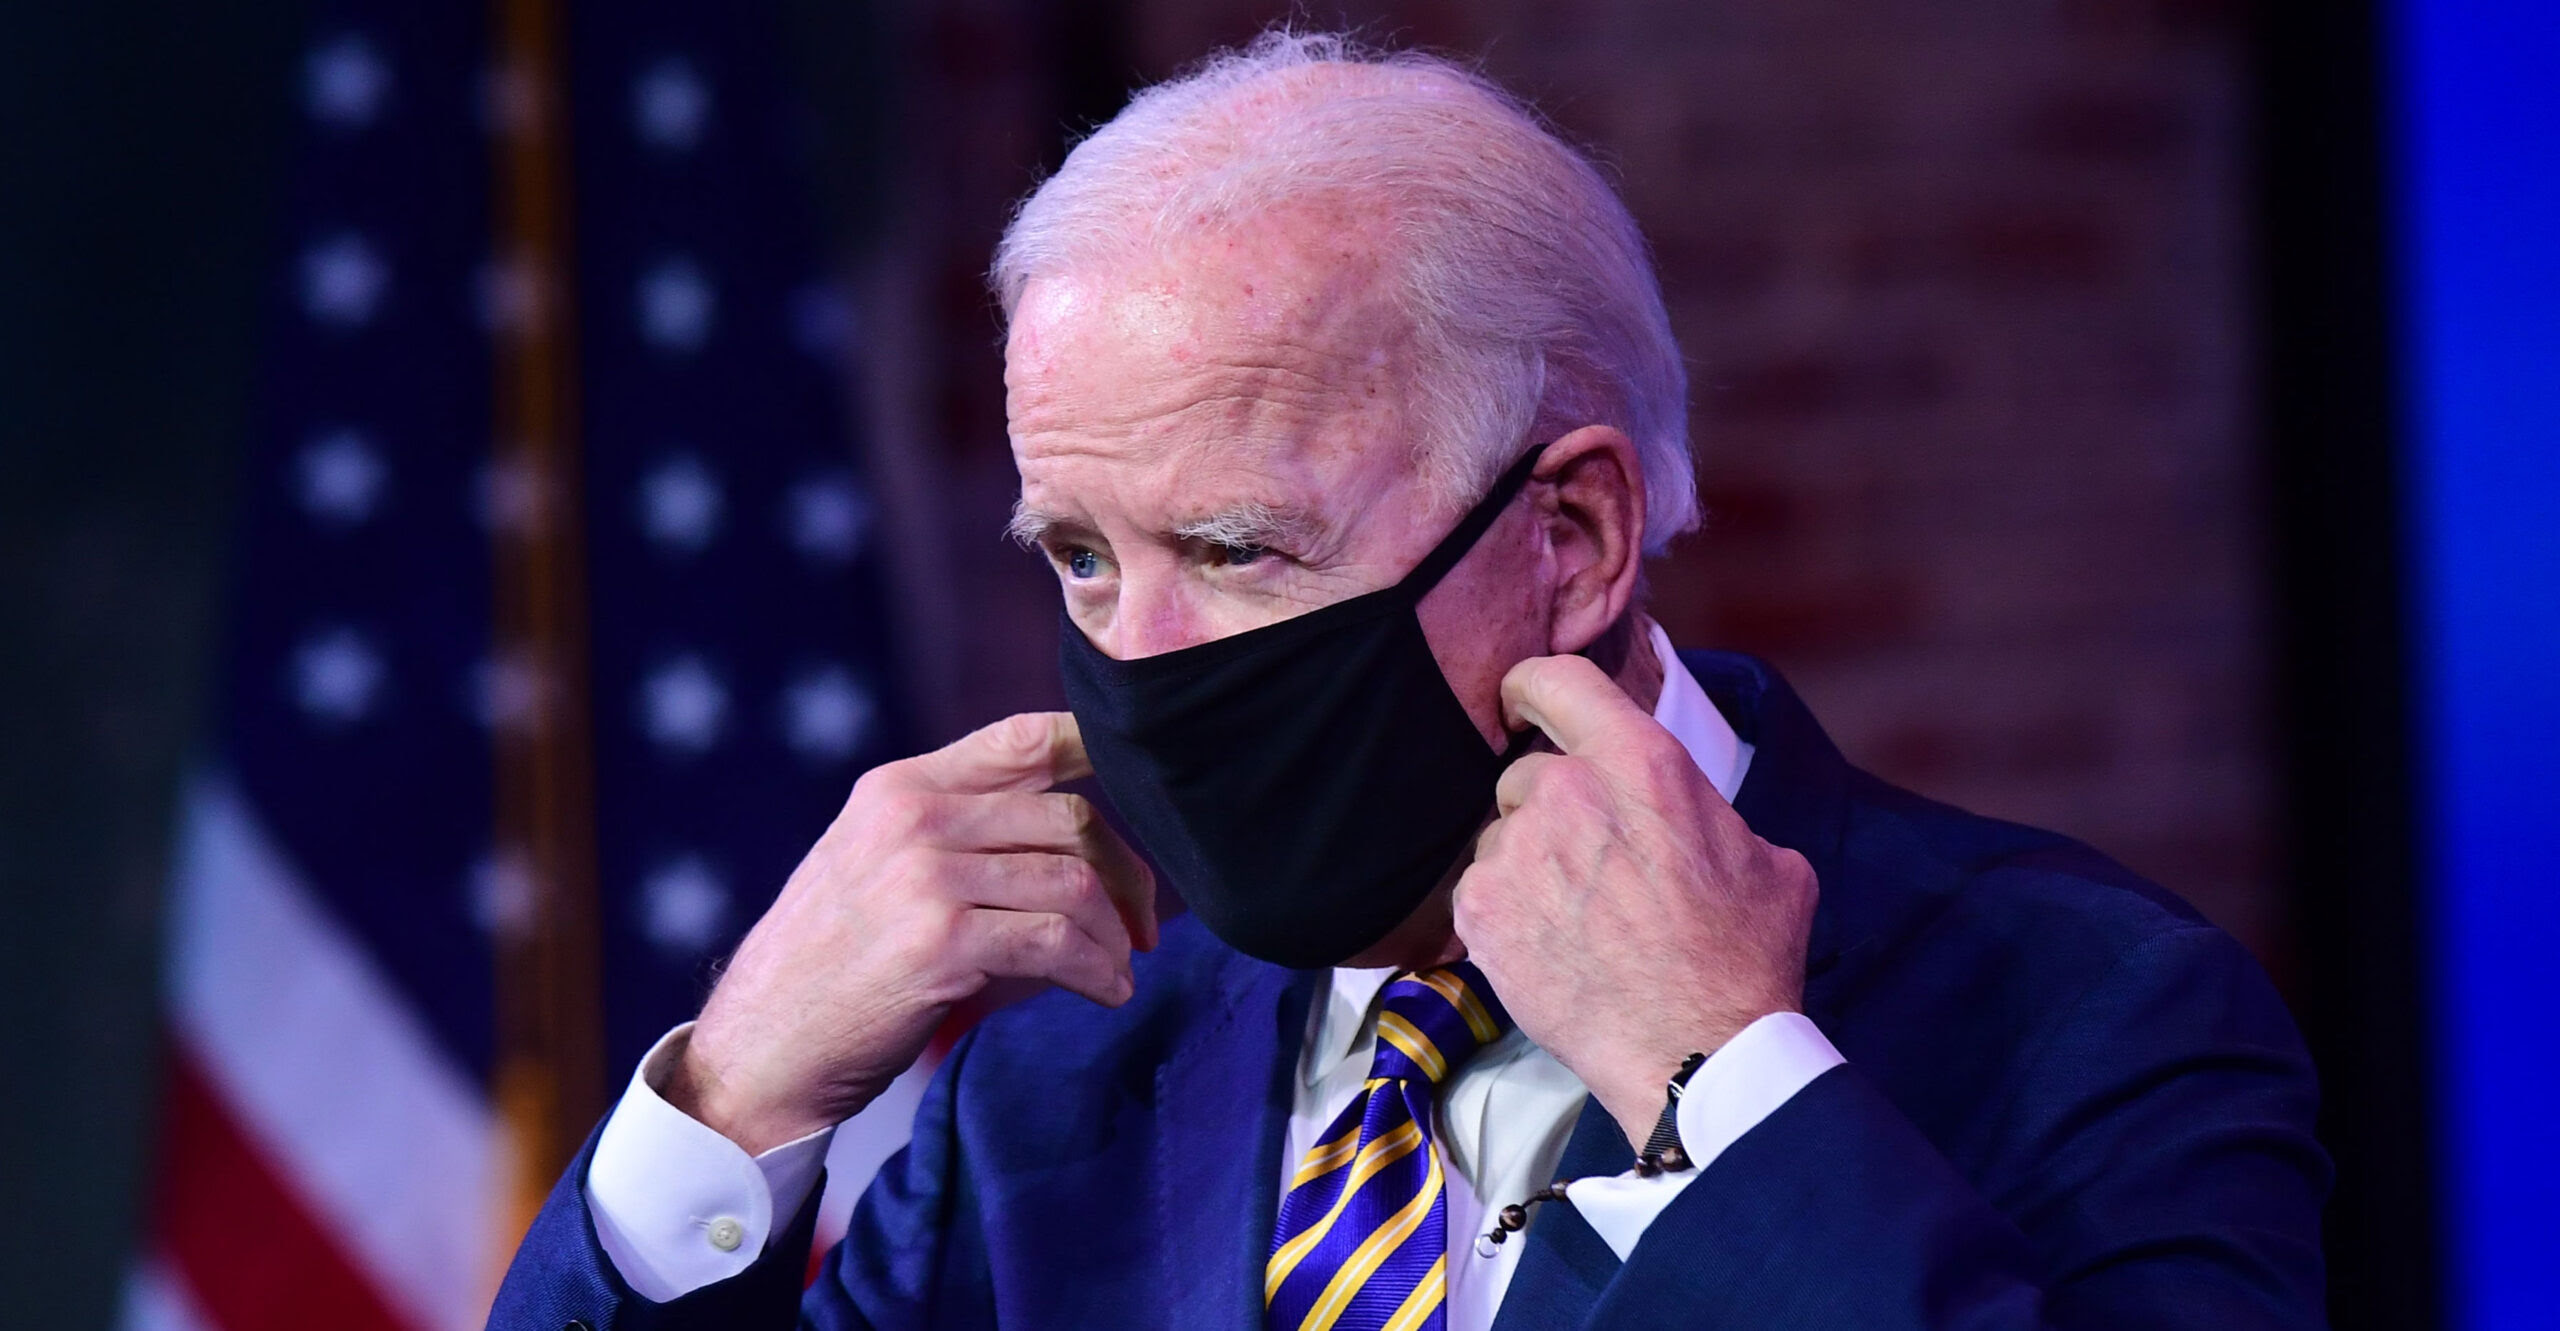 My Encounter With Medicaid Is a Cautionary Tale About Biden’s Public Option